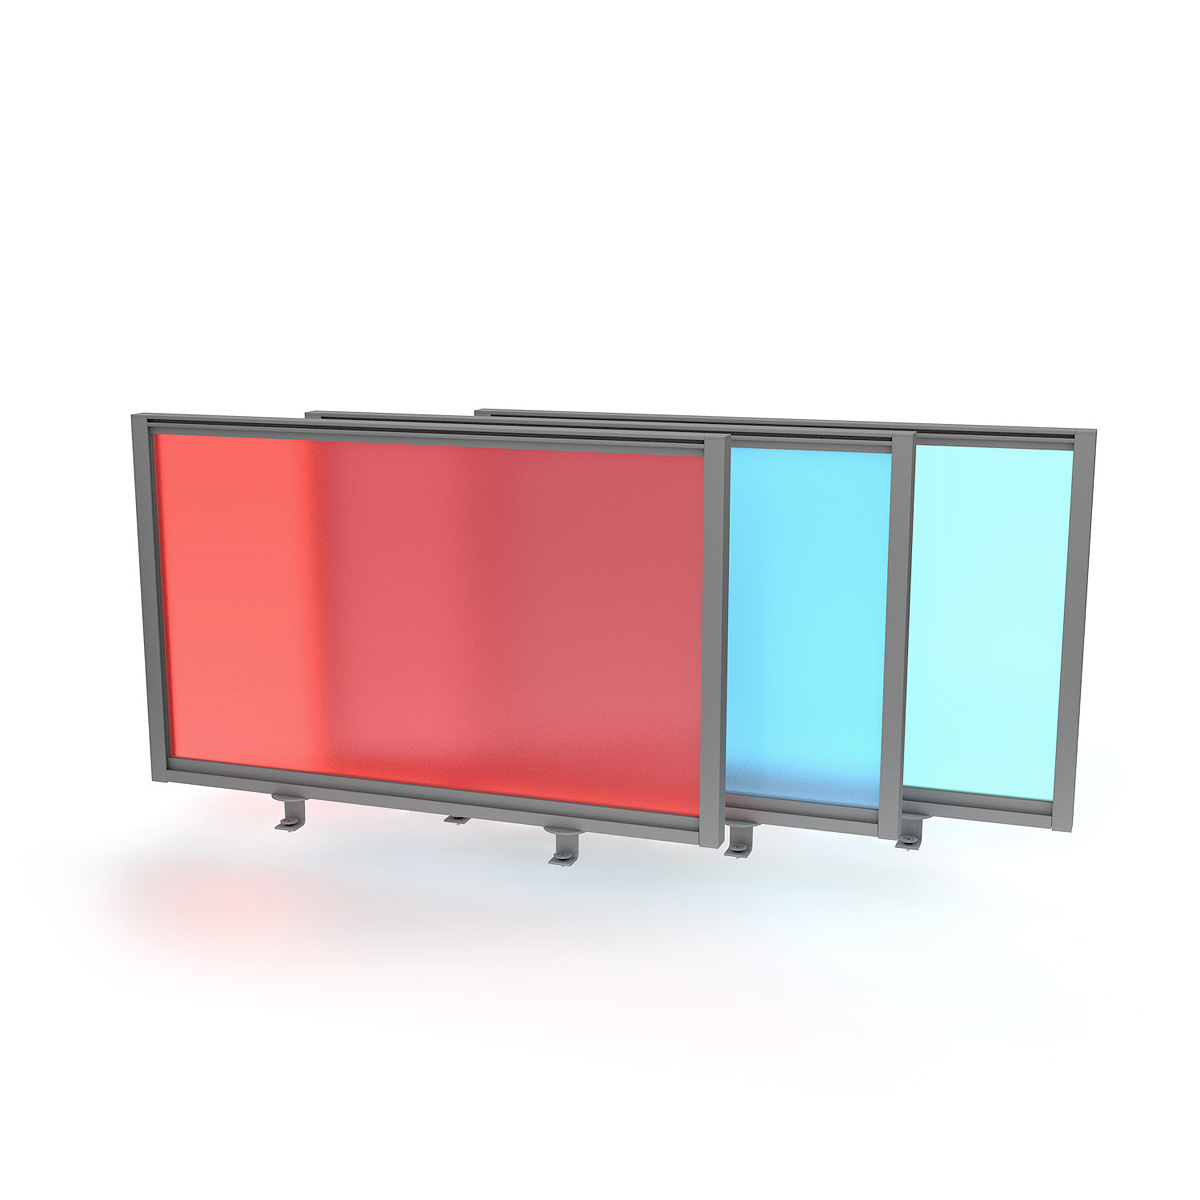 FRONTIER® Glazed Office Screen Desk Dividers - Choose From Three Colours Perspex® Screens